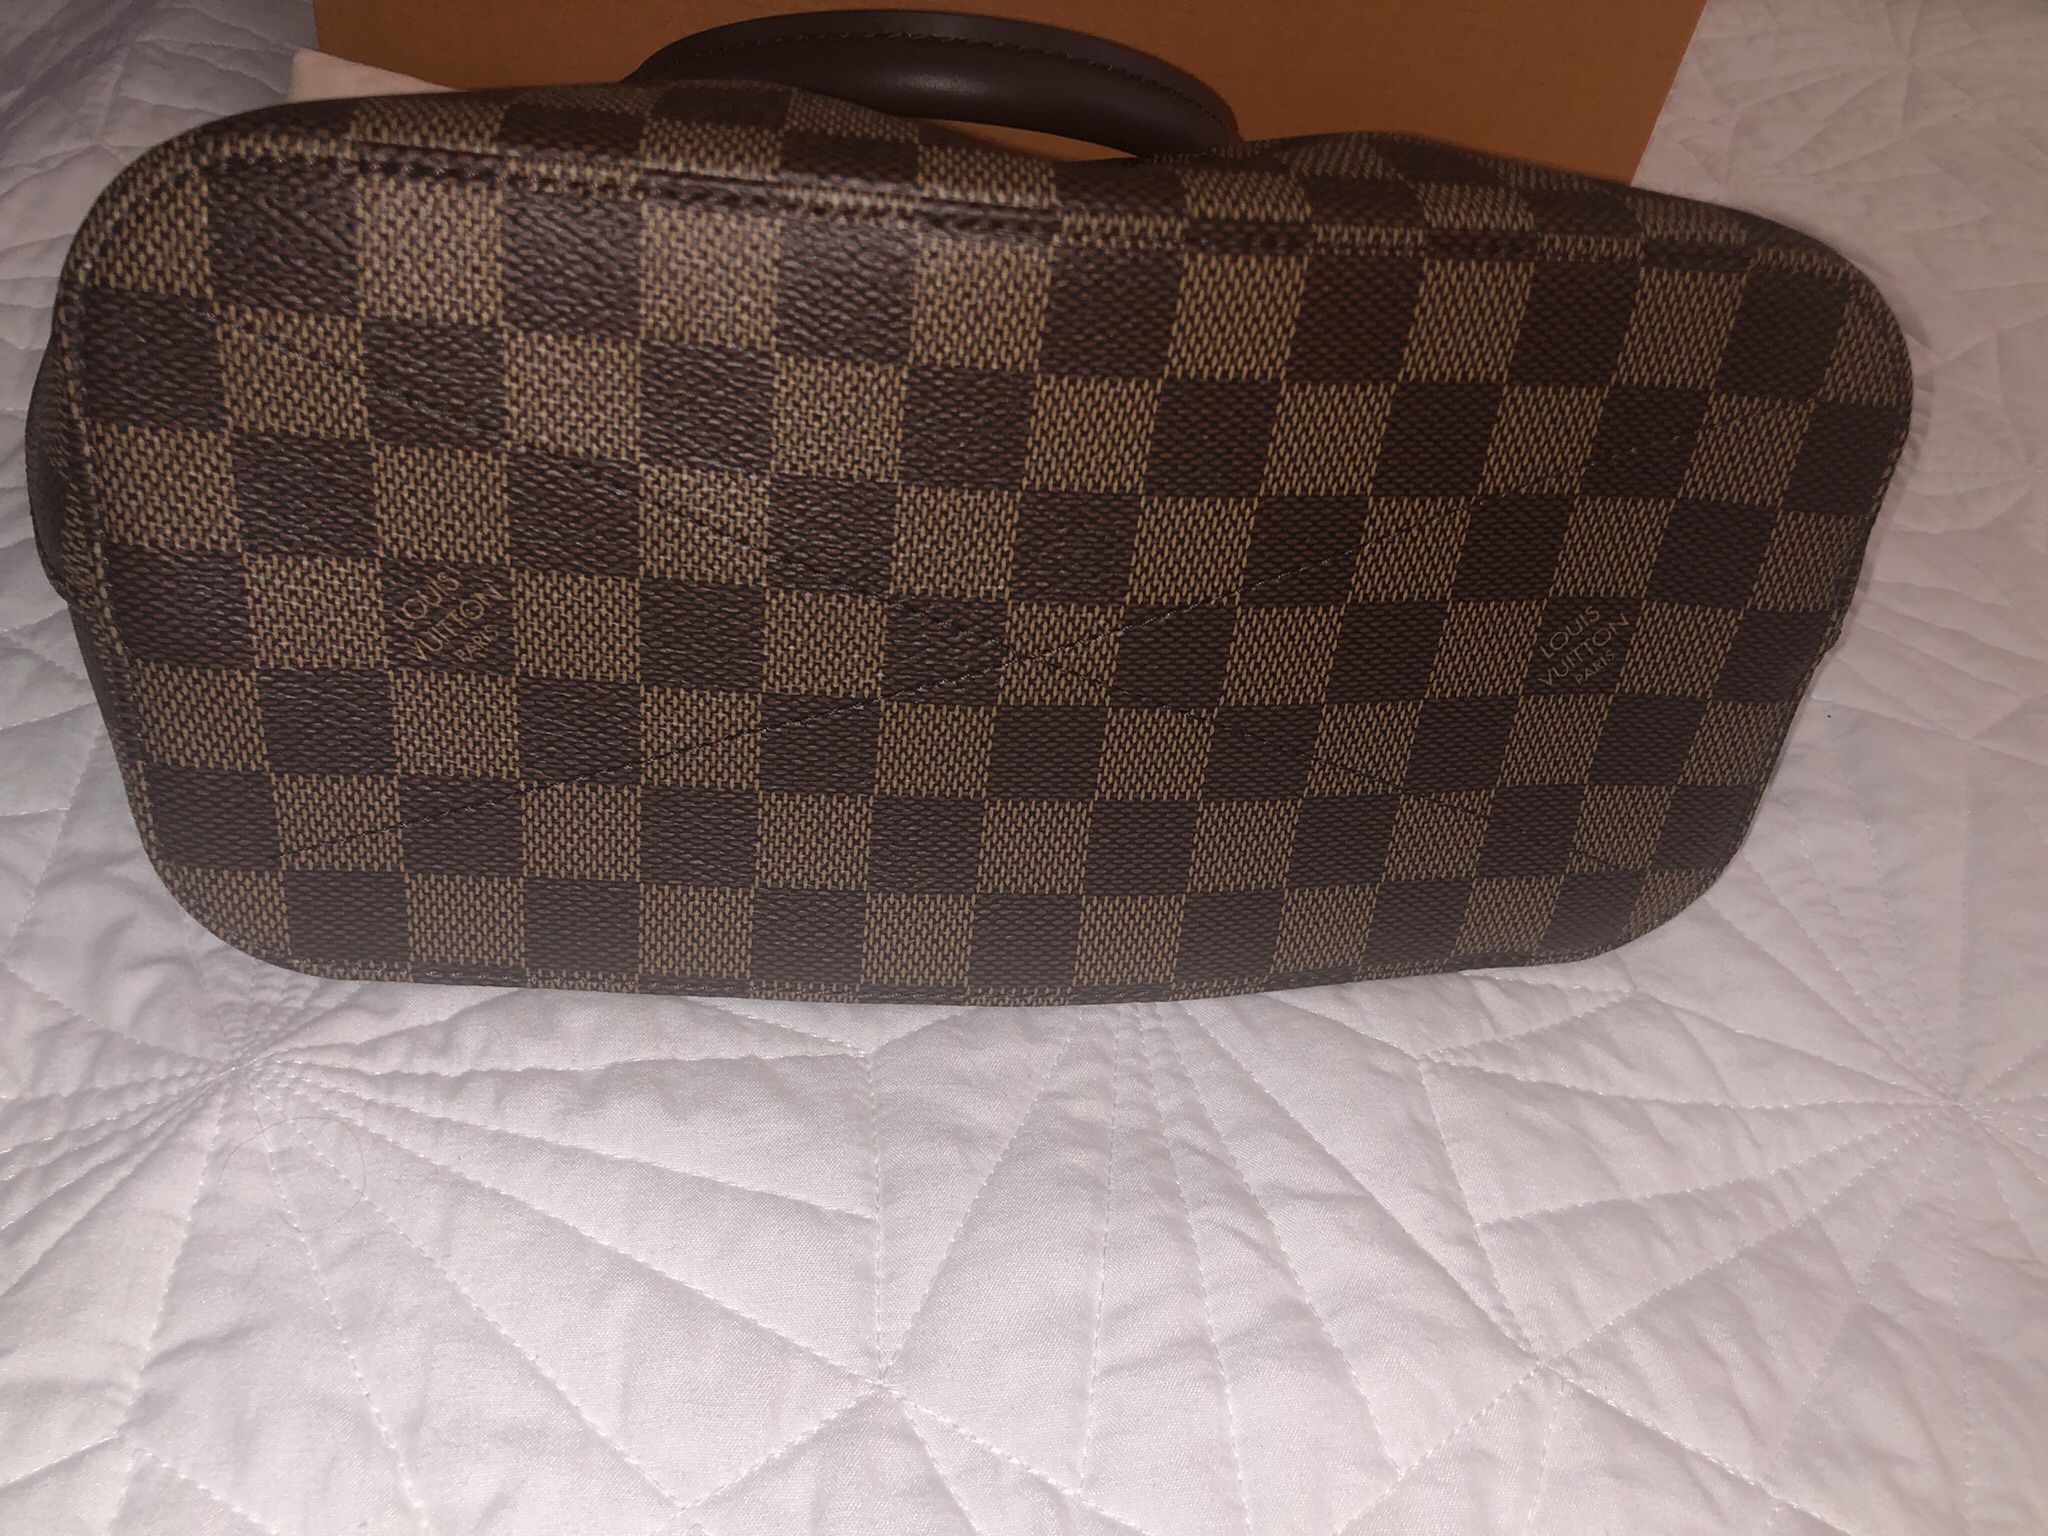 Louis Vuitton pM Sienna Purse Crossbody for Sale in Jamul, CA - OfferUp